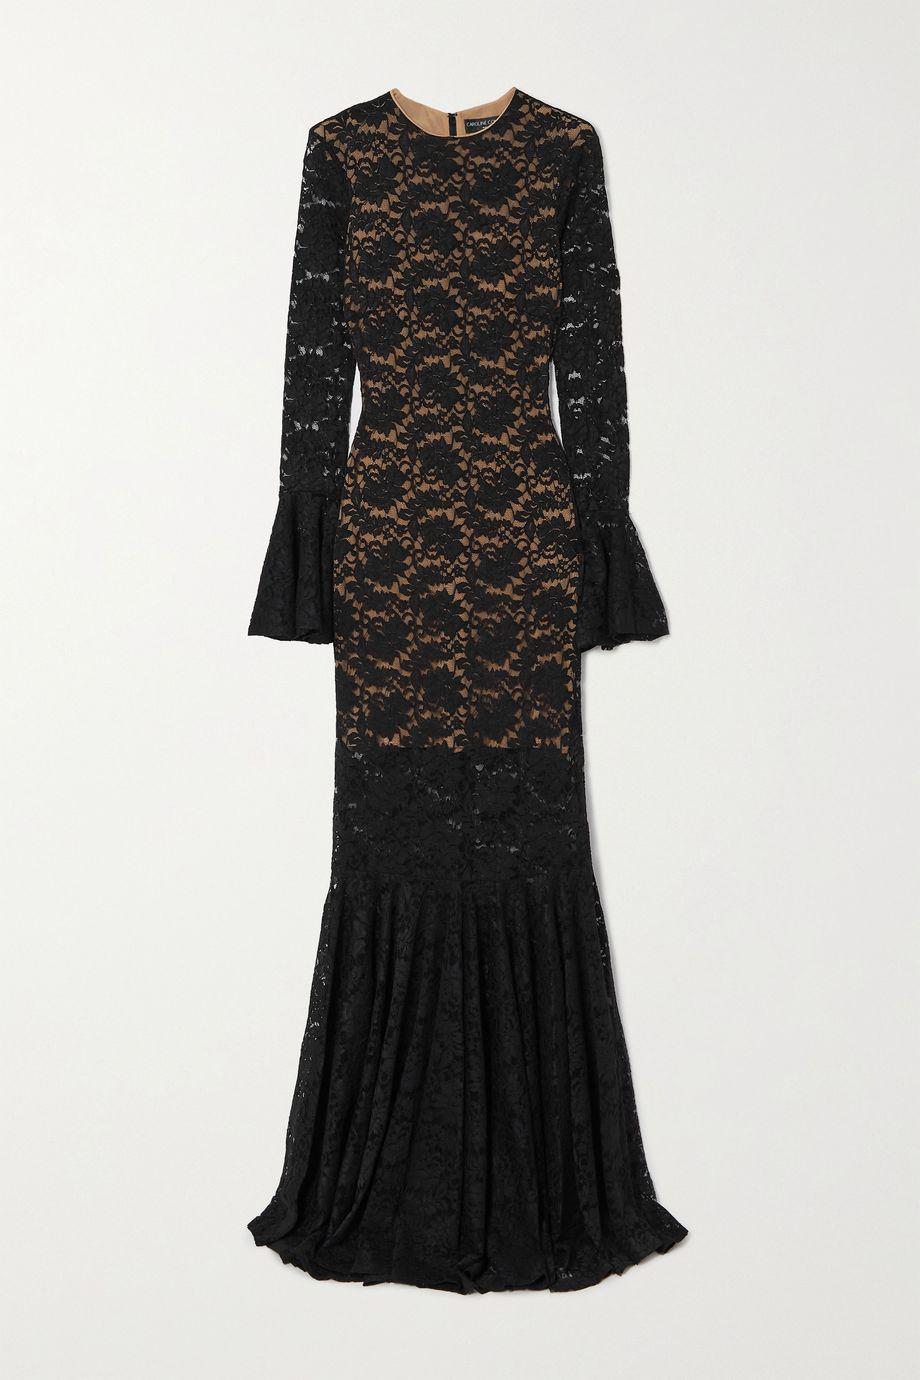 Allonia ruffled stretch-corded lace gown by CAROLINE CONSTAS